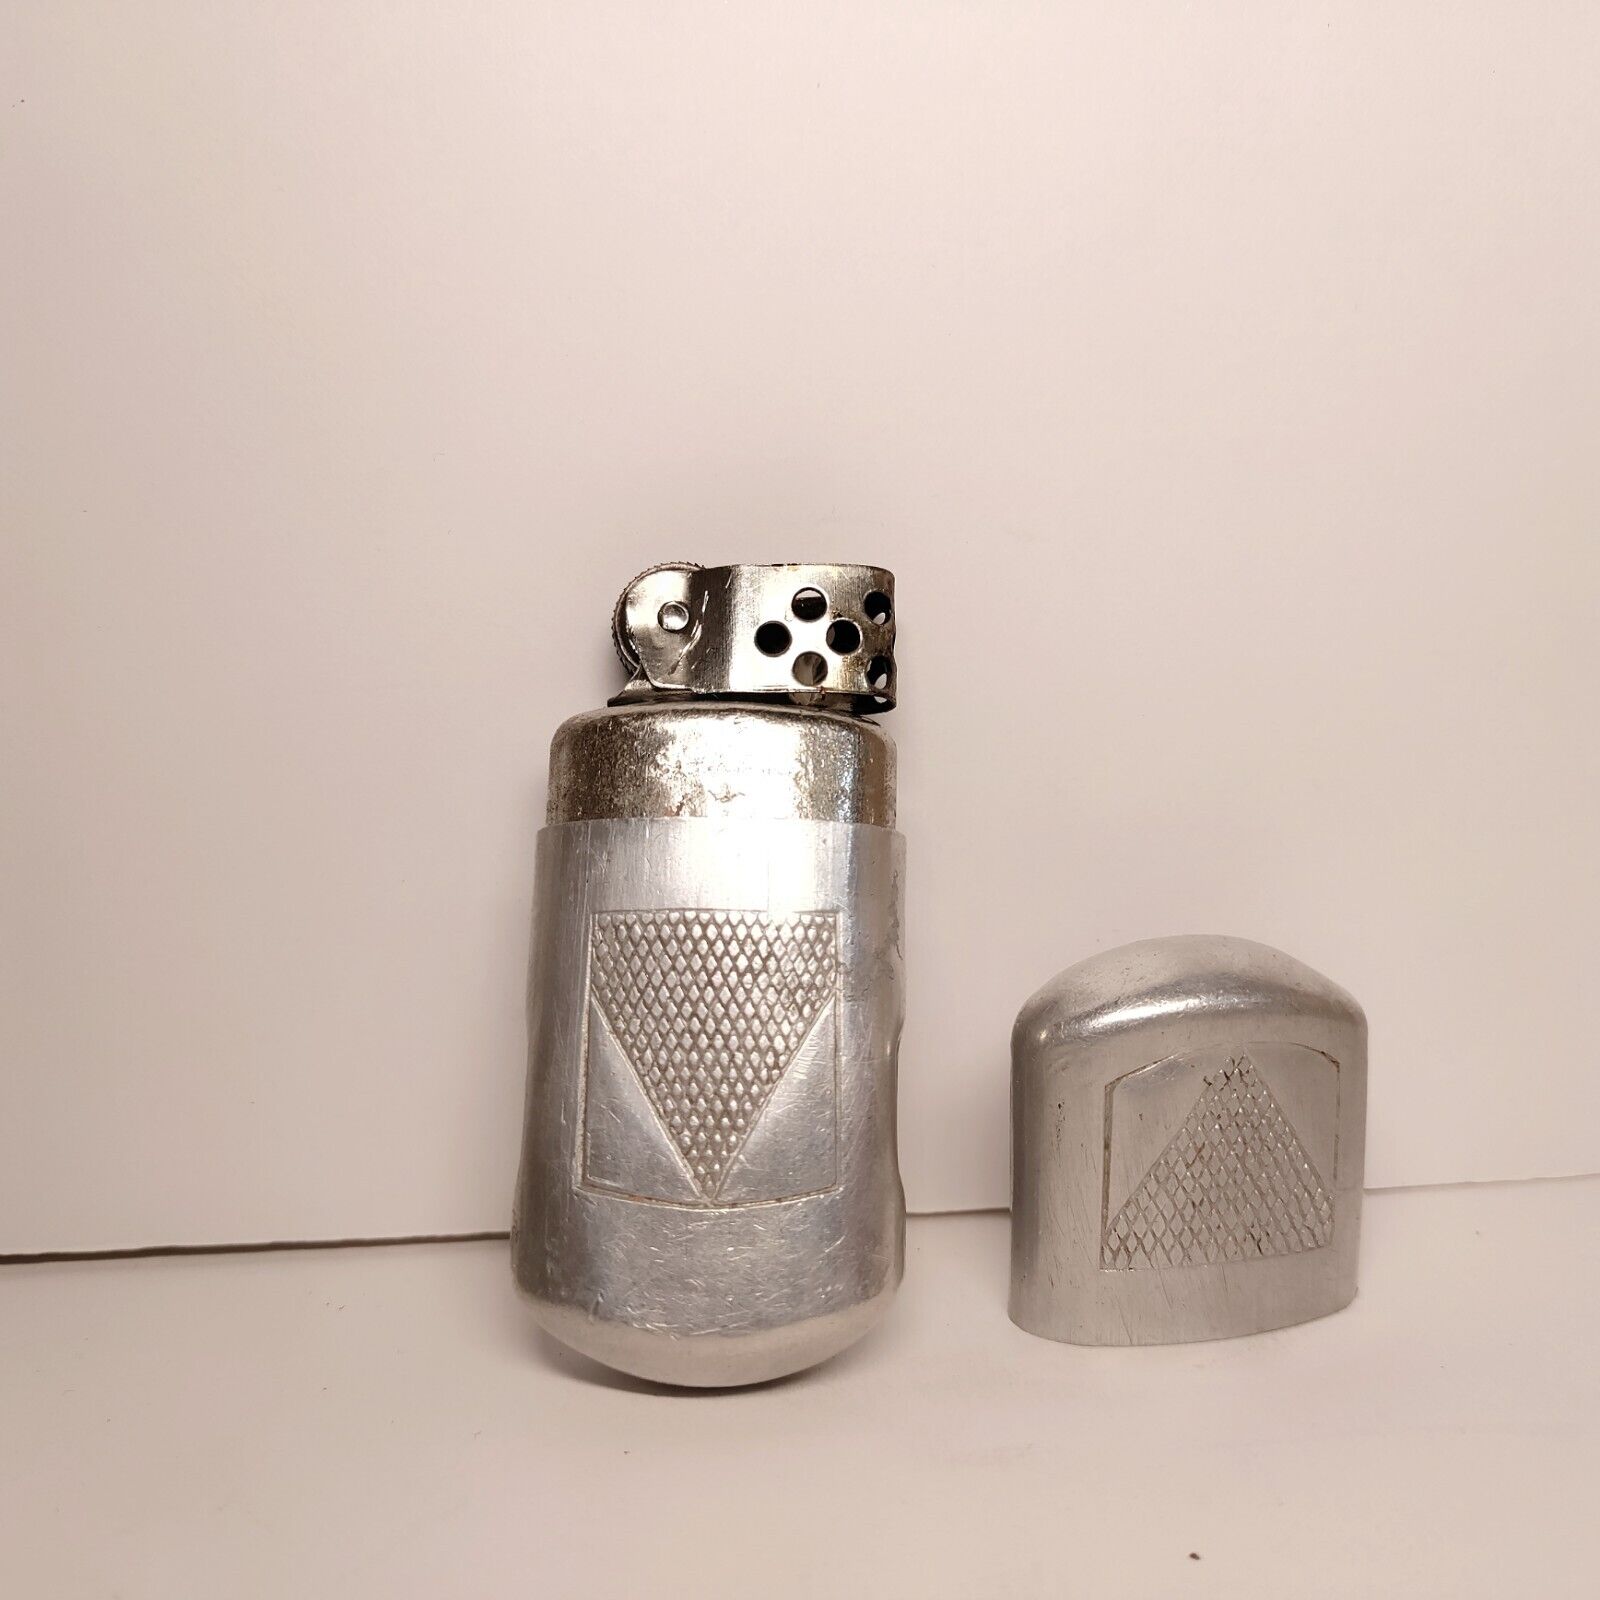 VTG RARE OLD WW2 WWII GERMAN WEHRMACHT ALUMINIUM TRENCH CIGARETTE PETROL LIGHTER